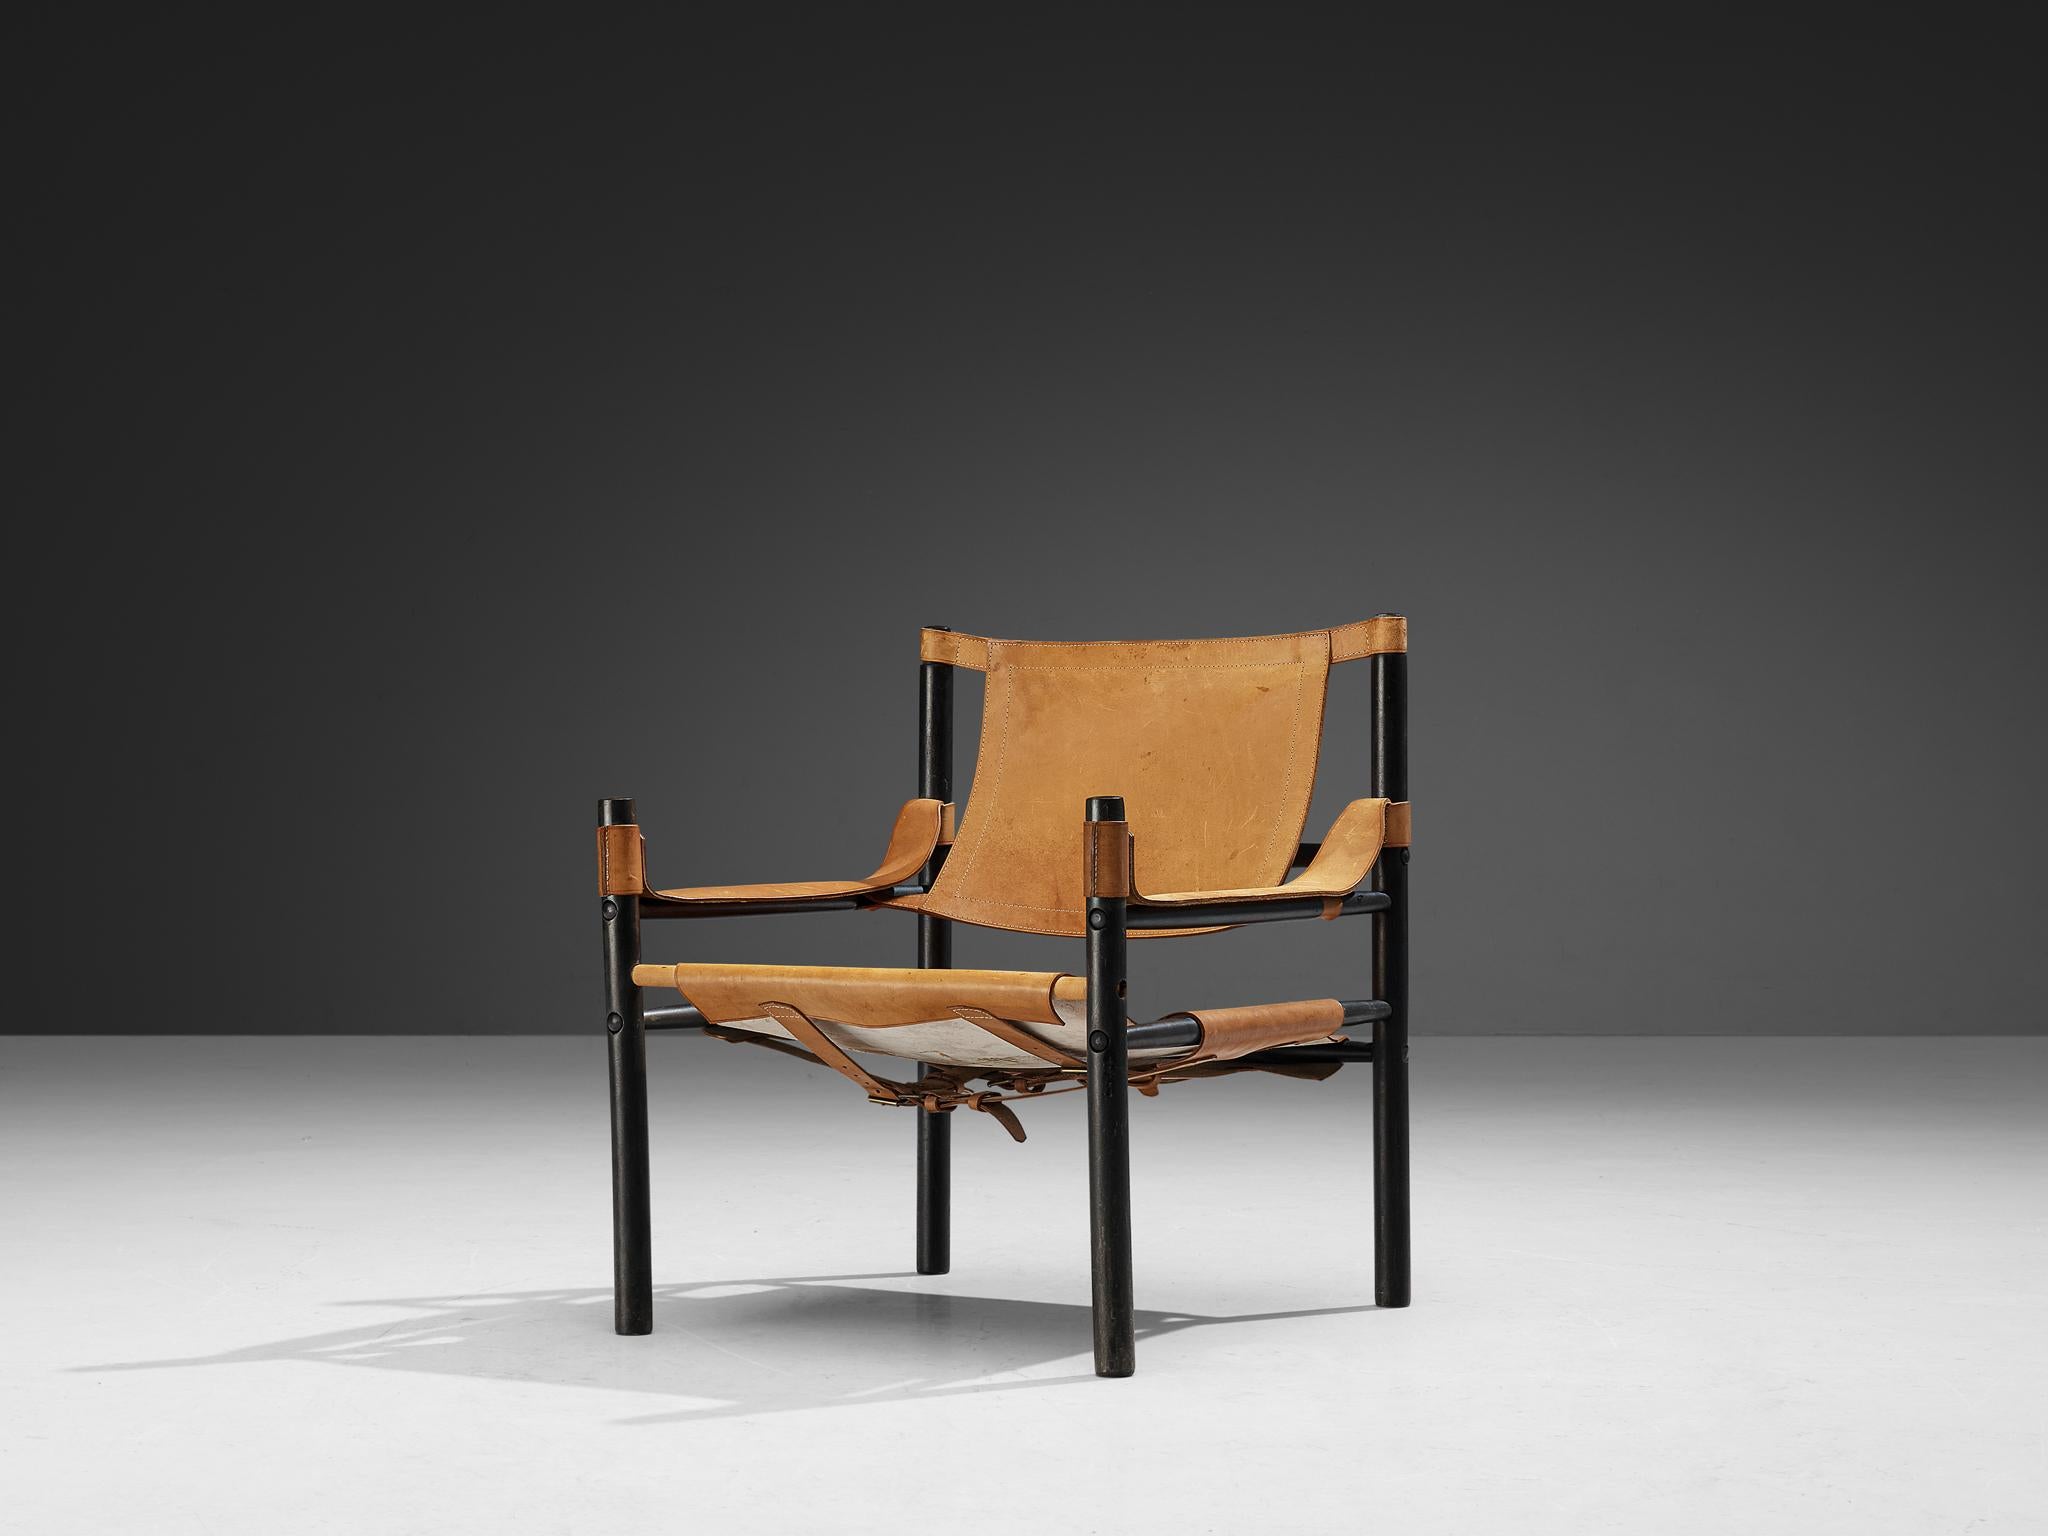 Abel Gonzalez, sling safari chair, wood, leather, brass, Argentina, 1960s.

This safari chair by the Argentinian designer Abel Gonzalez is based on a proportioned layout. Straight lines and geometric shapes dynamically structure the design. The